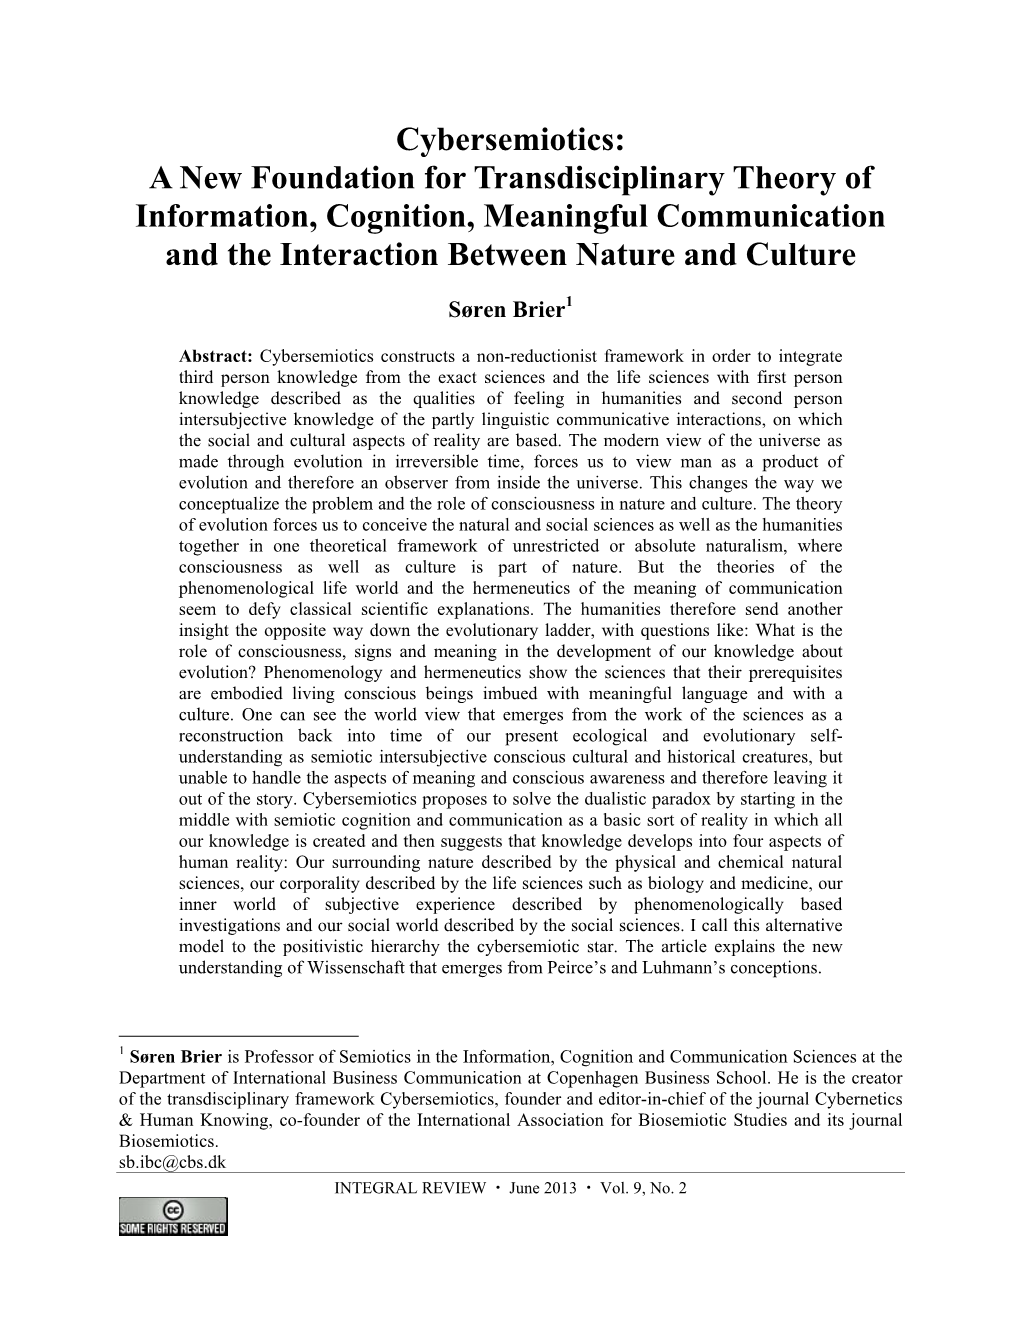 Cybersemiotics: a New Foundation for Transdisciplinary Theory of Information, Cognition, Meaningful Communication and the Interaction Between Nature and Culture